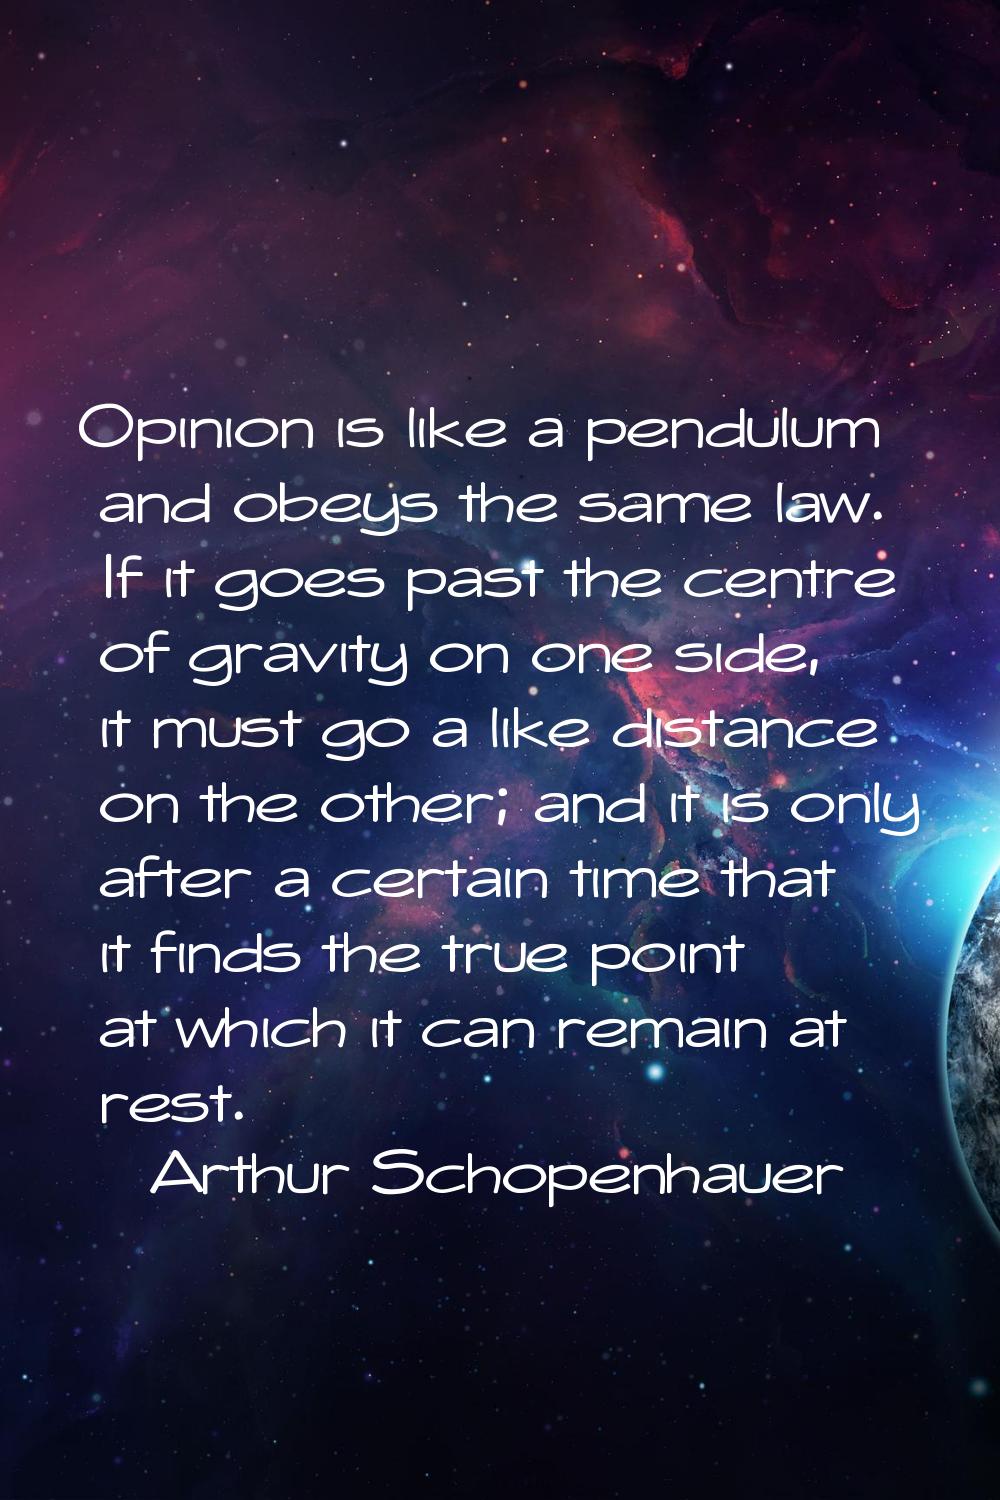 Opinion is like a pendulum and obeys the same law. If it goes past the centre of gravity on one sid